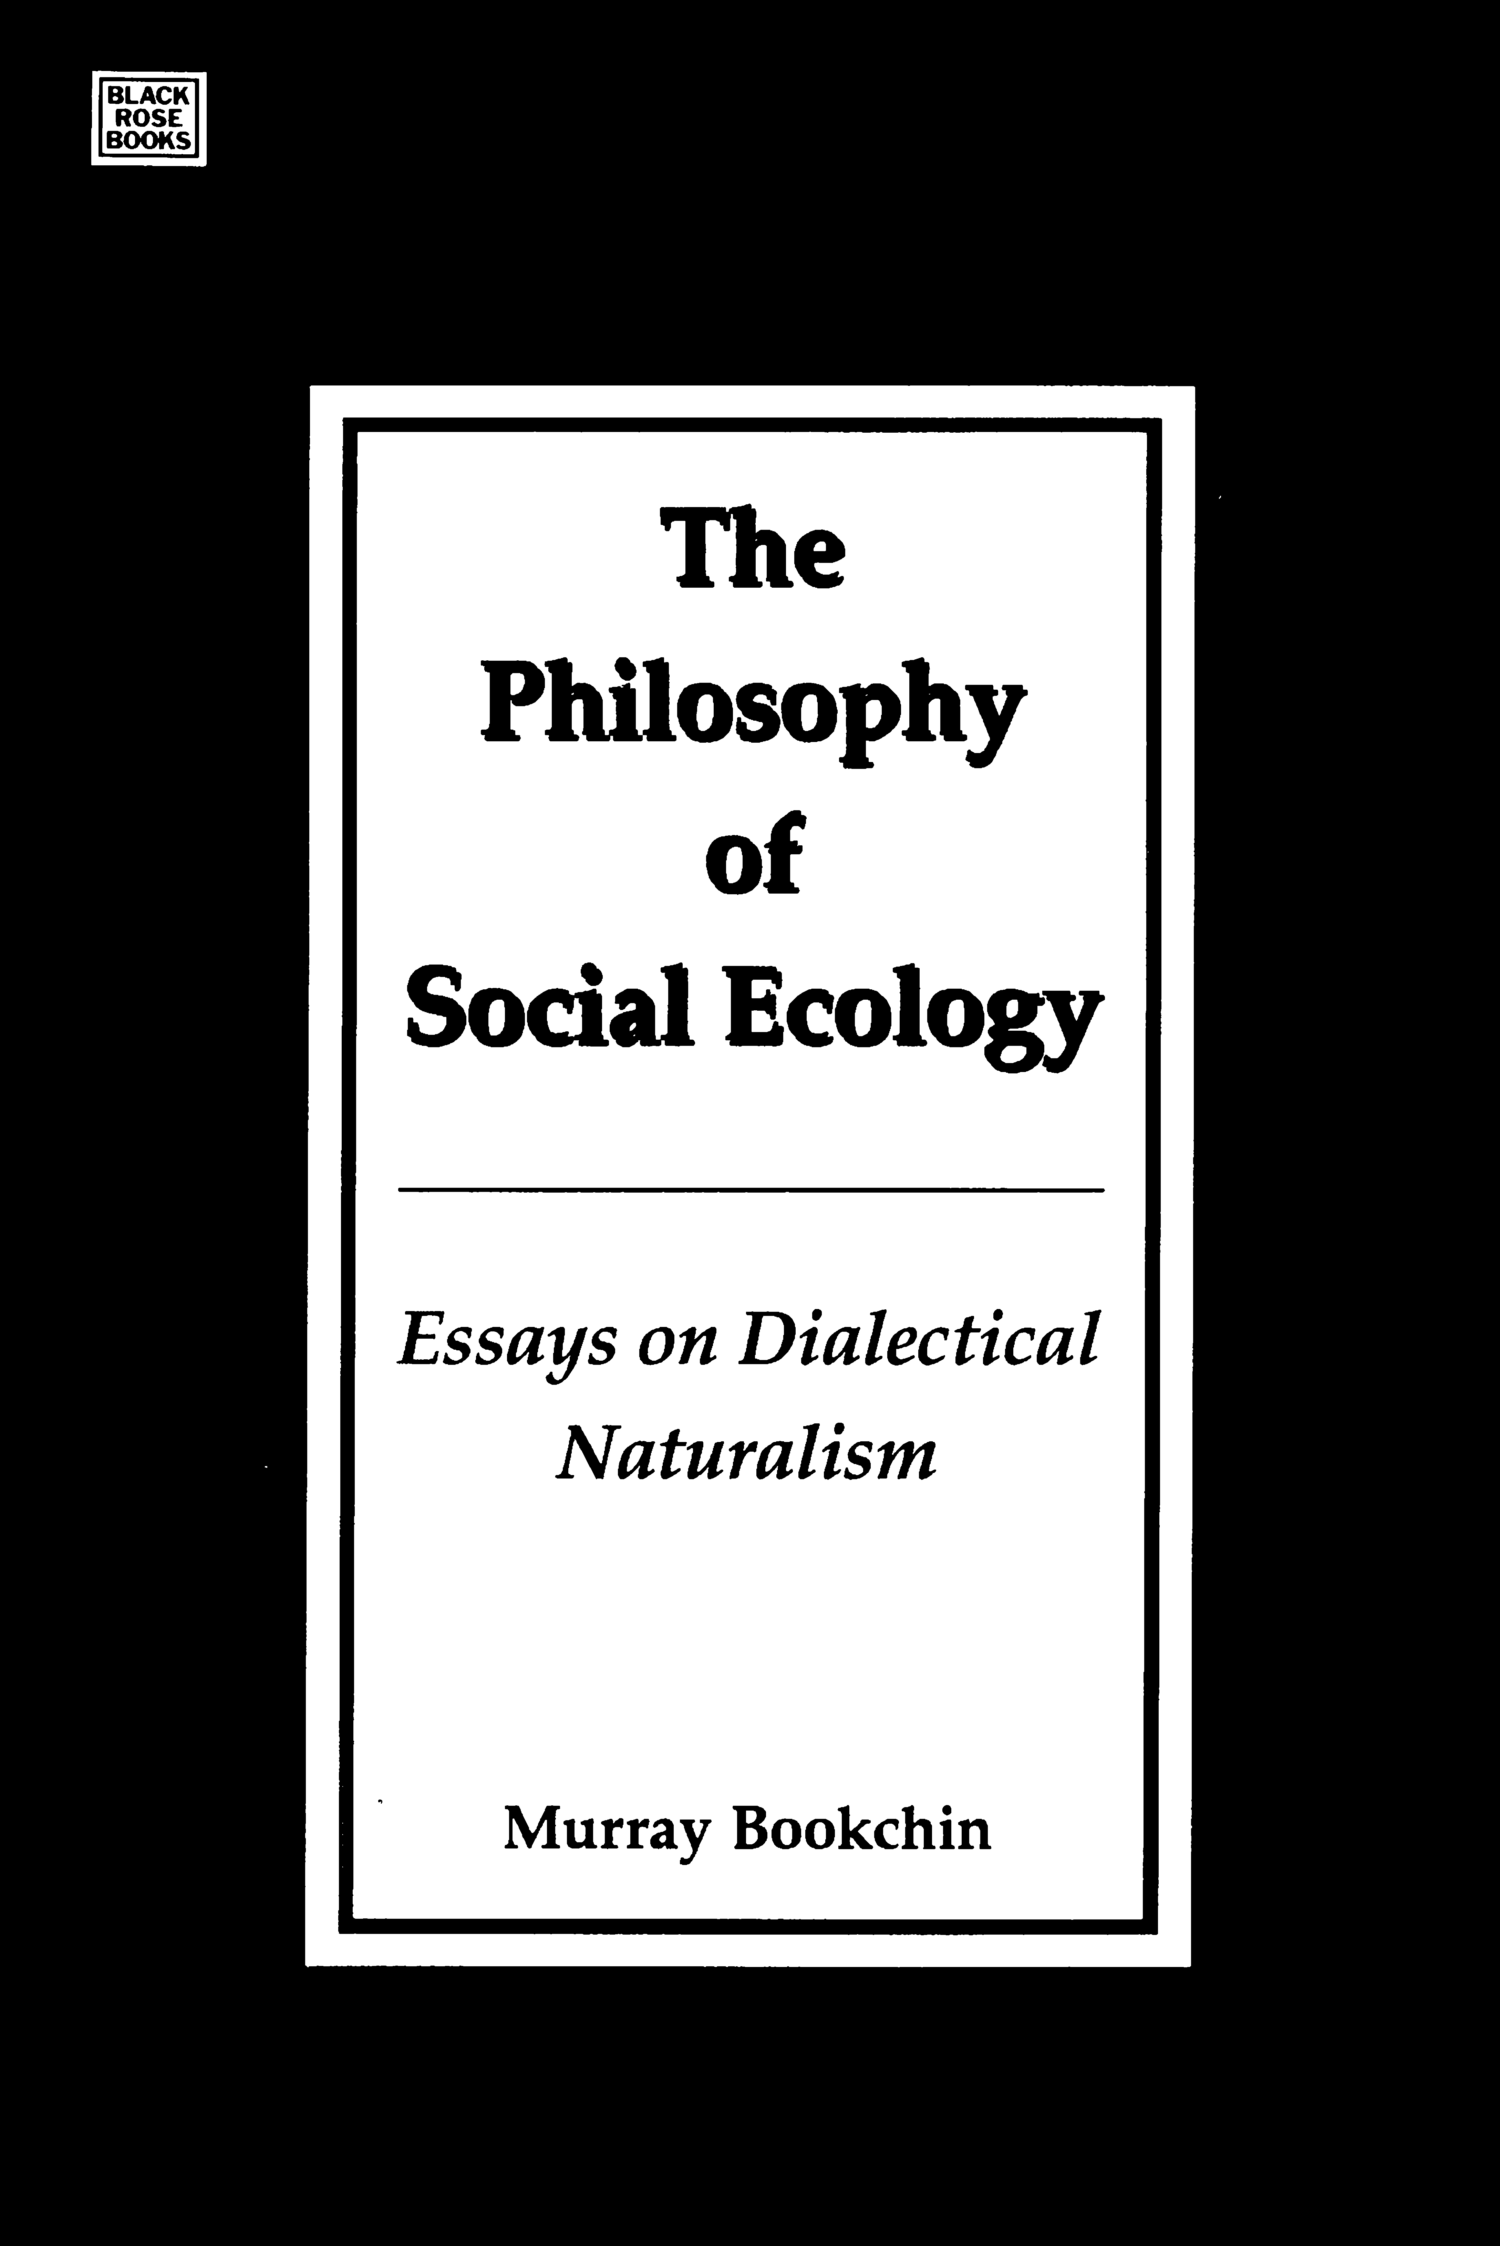 m-b-murray-bookchin-the-philosophy-of-social-ecolo-2.png